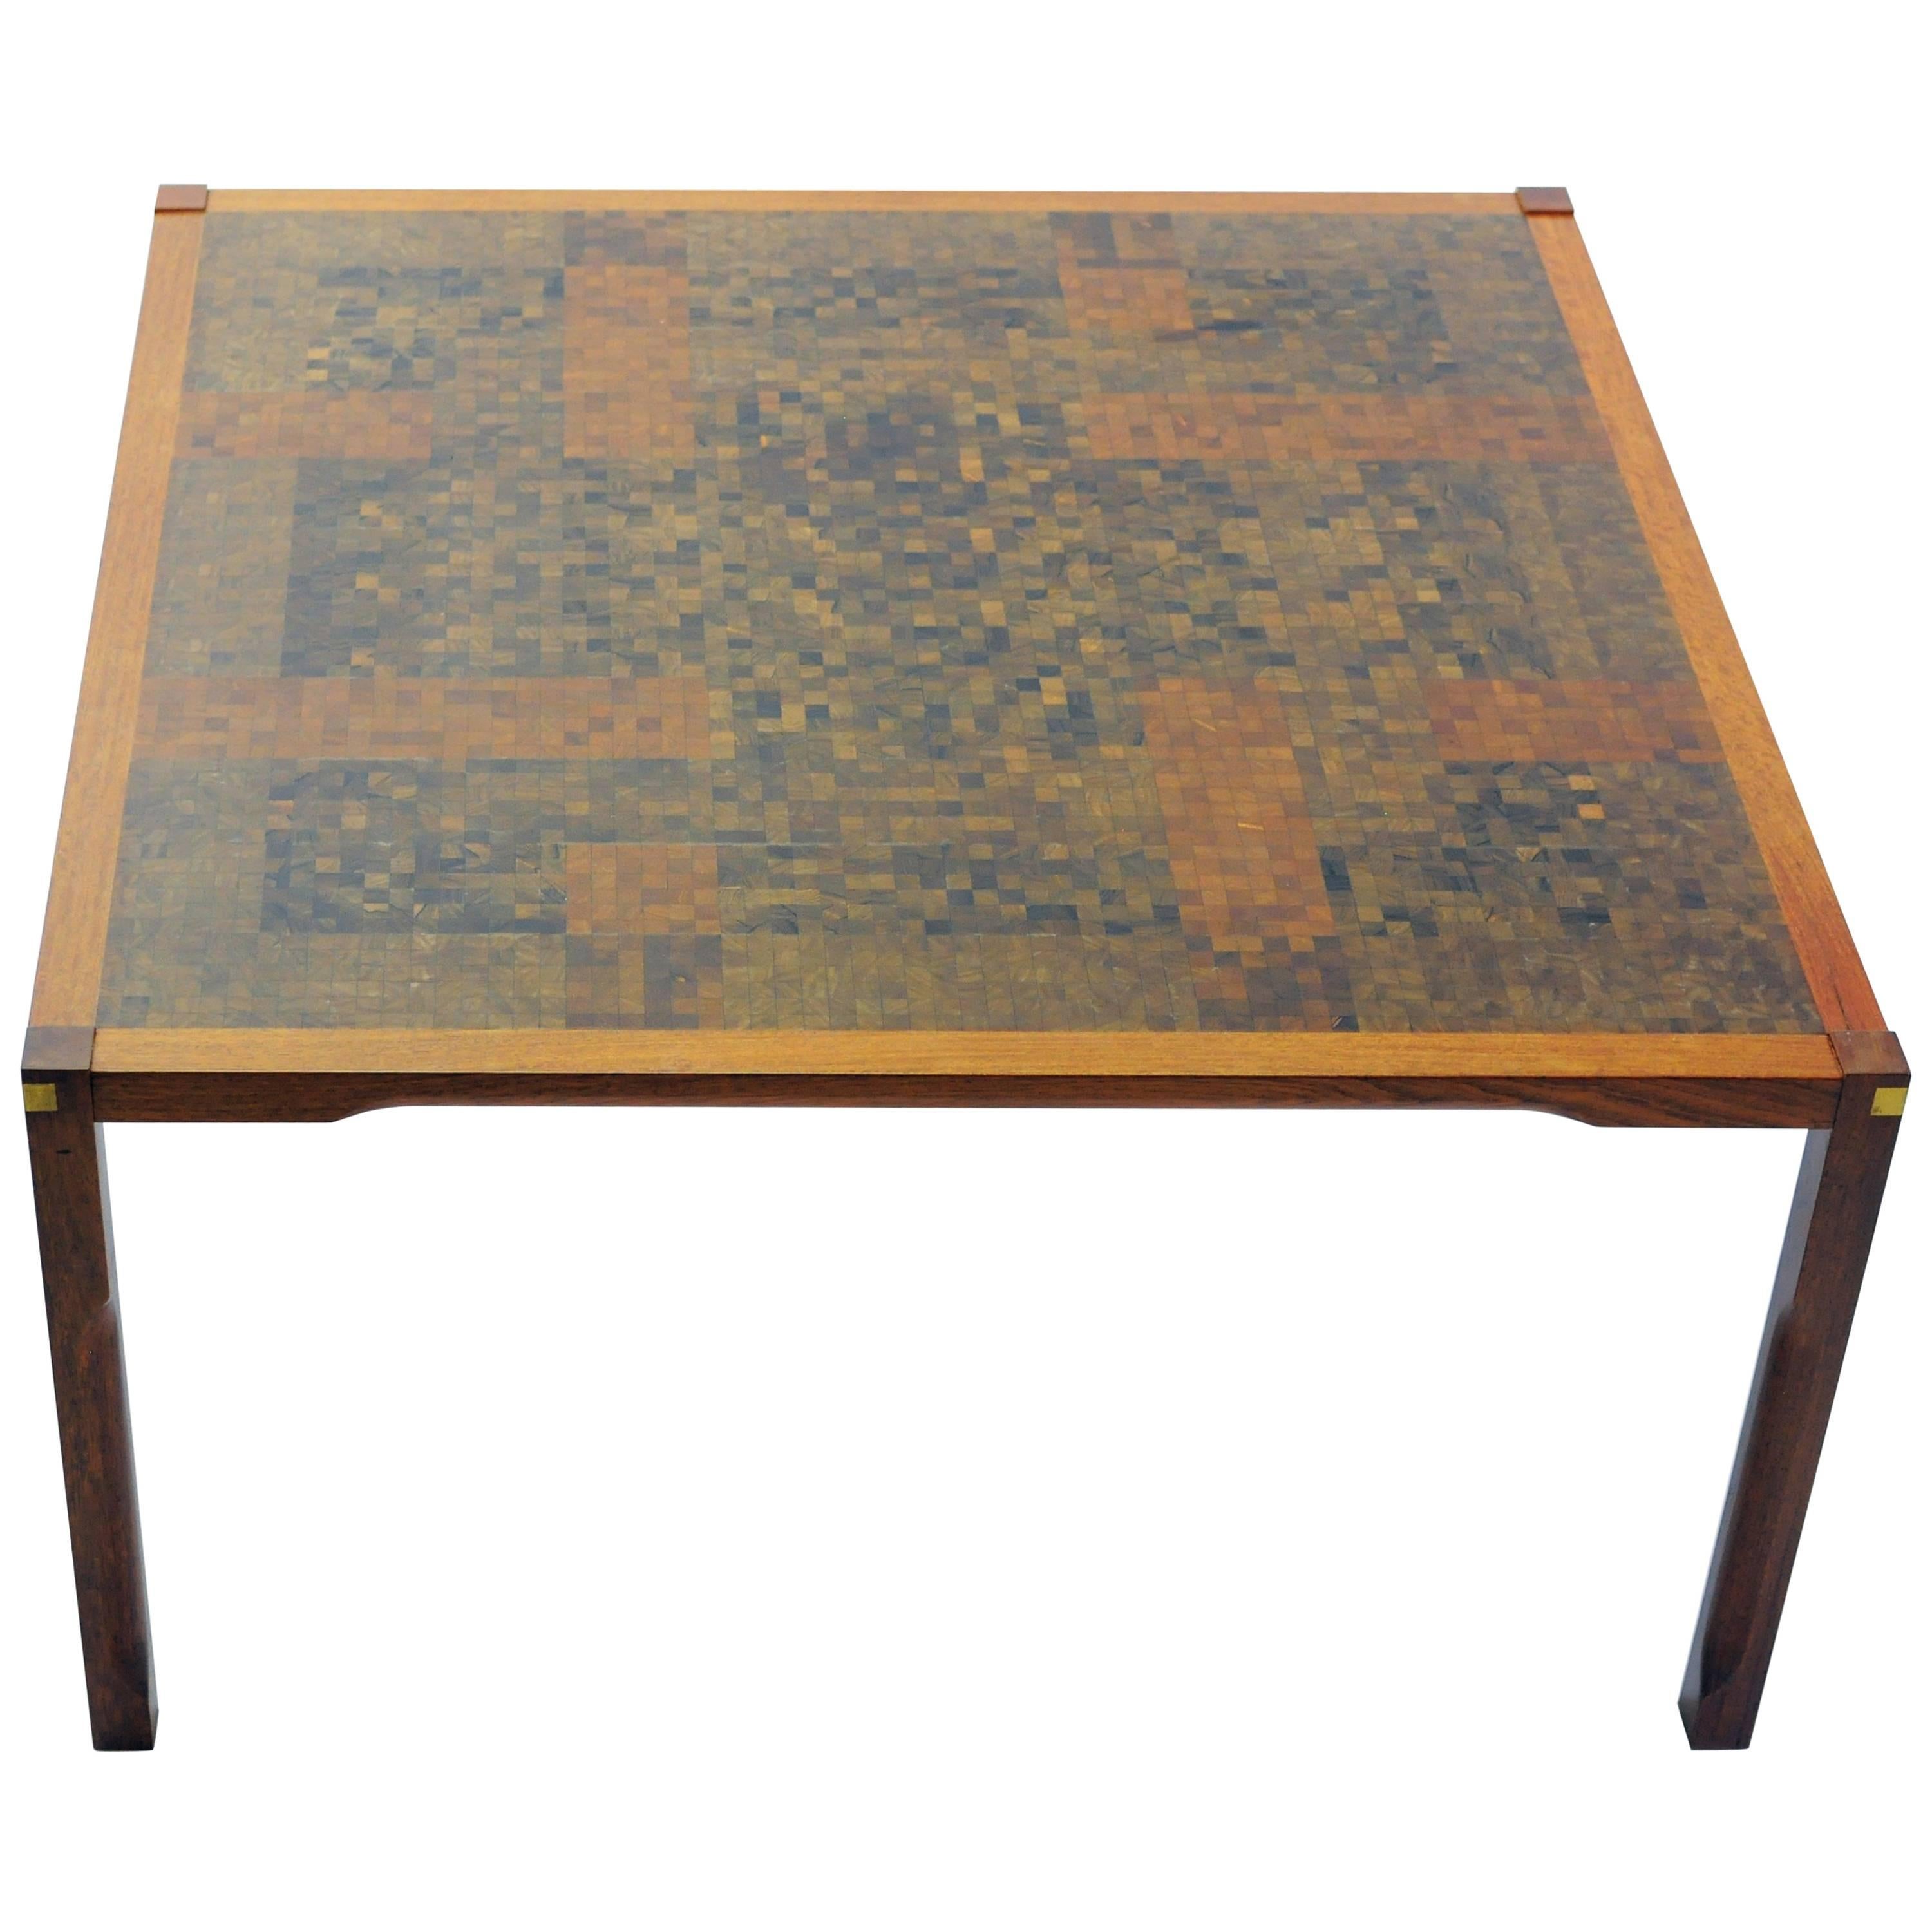 1970s Rolf Middelboe and Gorm Lindum Larsen Coffee Table in Padouk with Mosaic